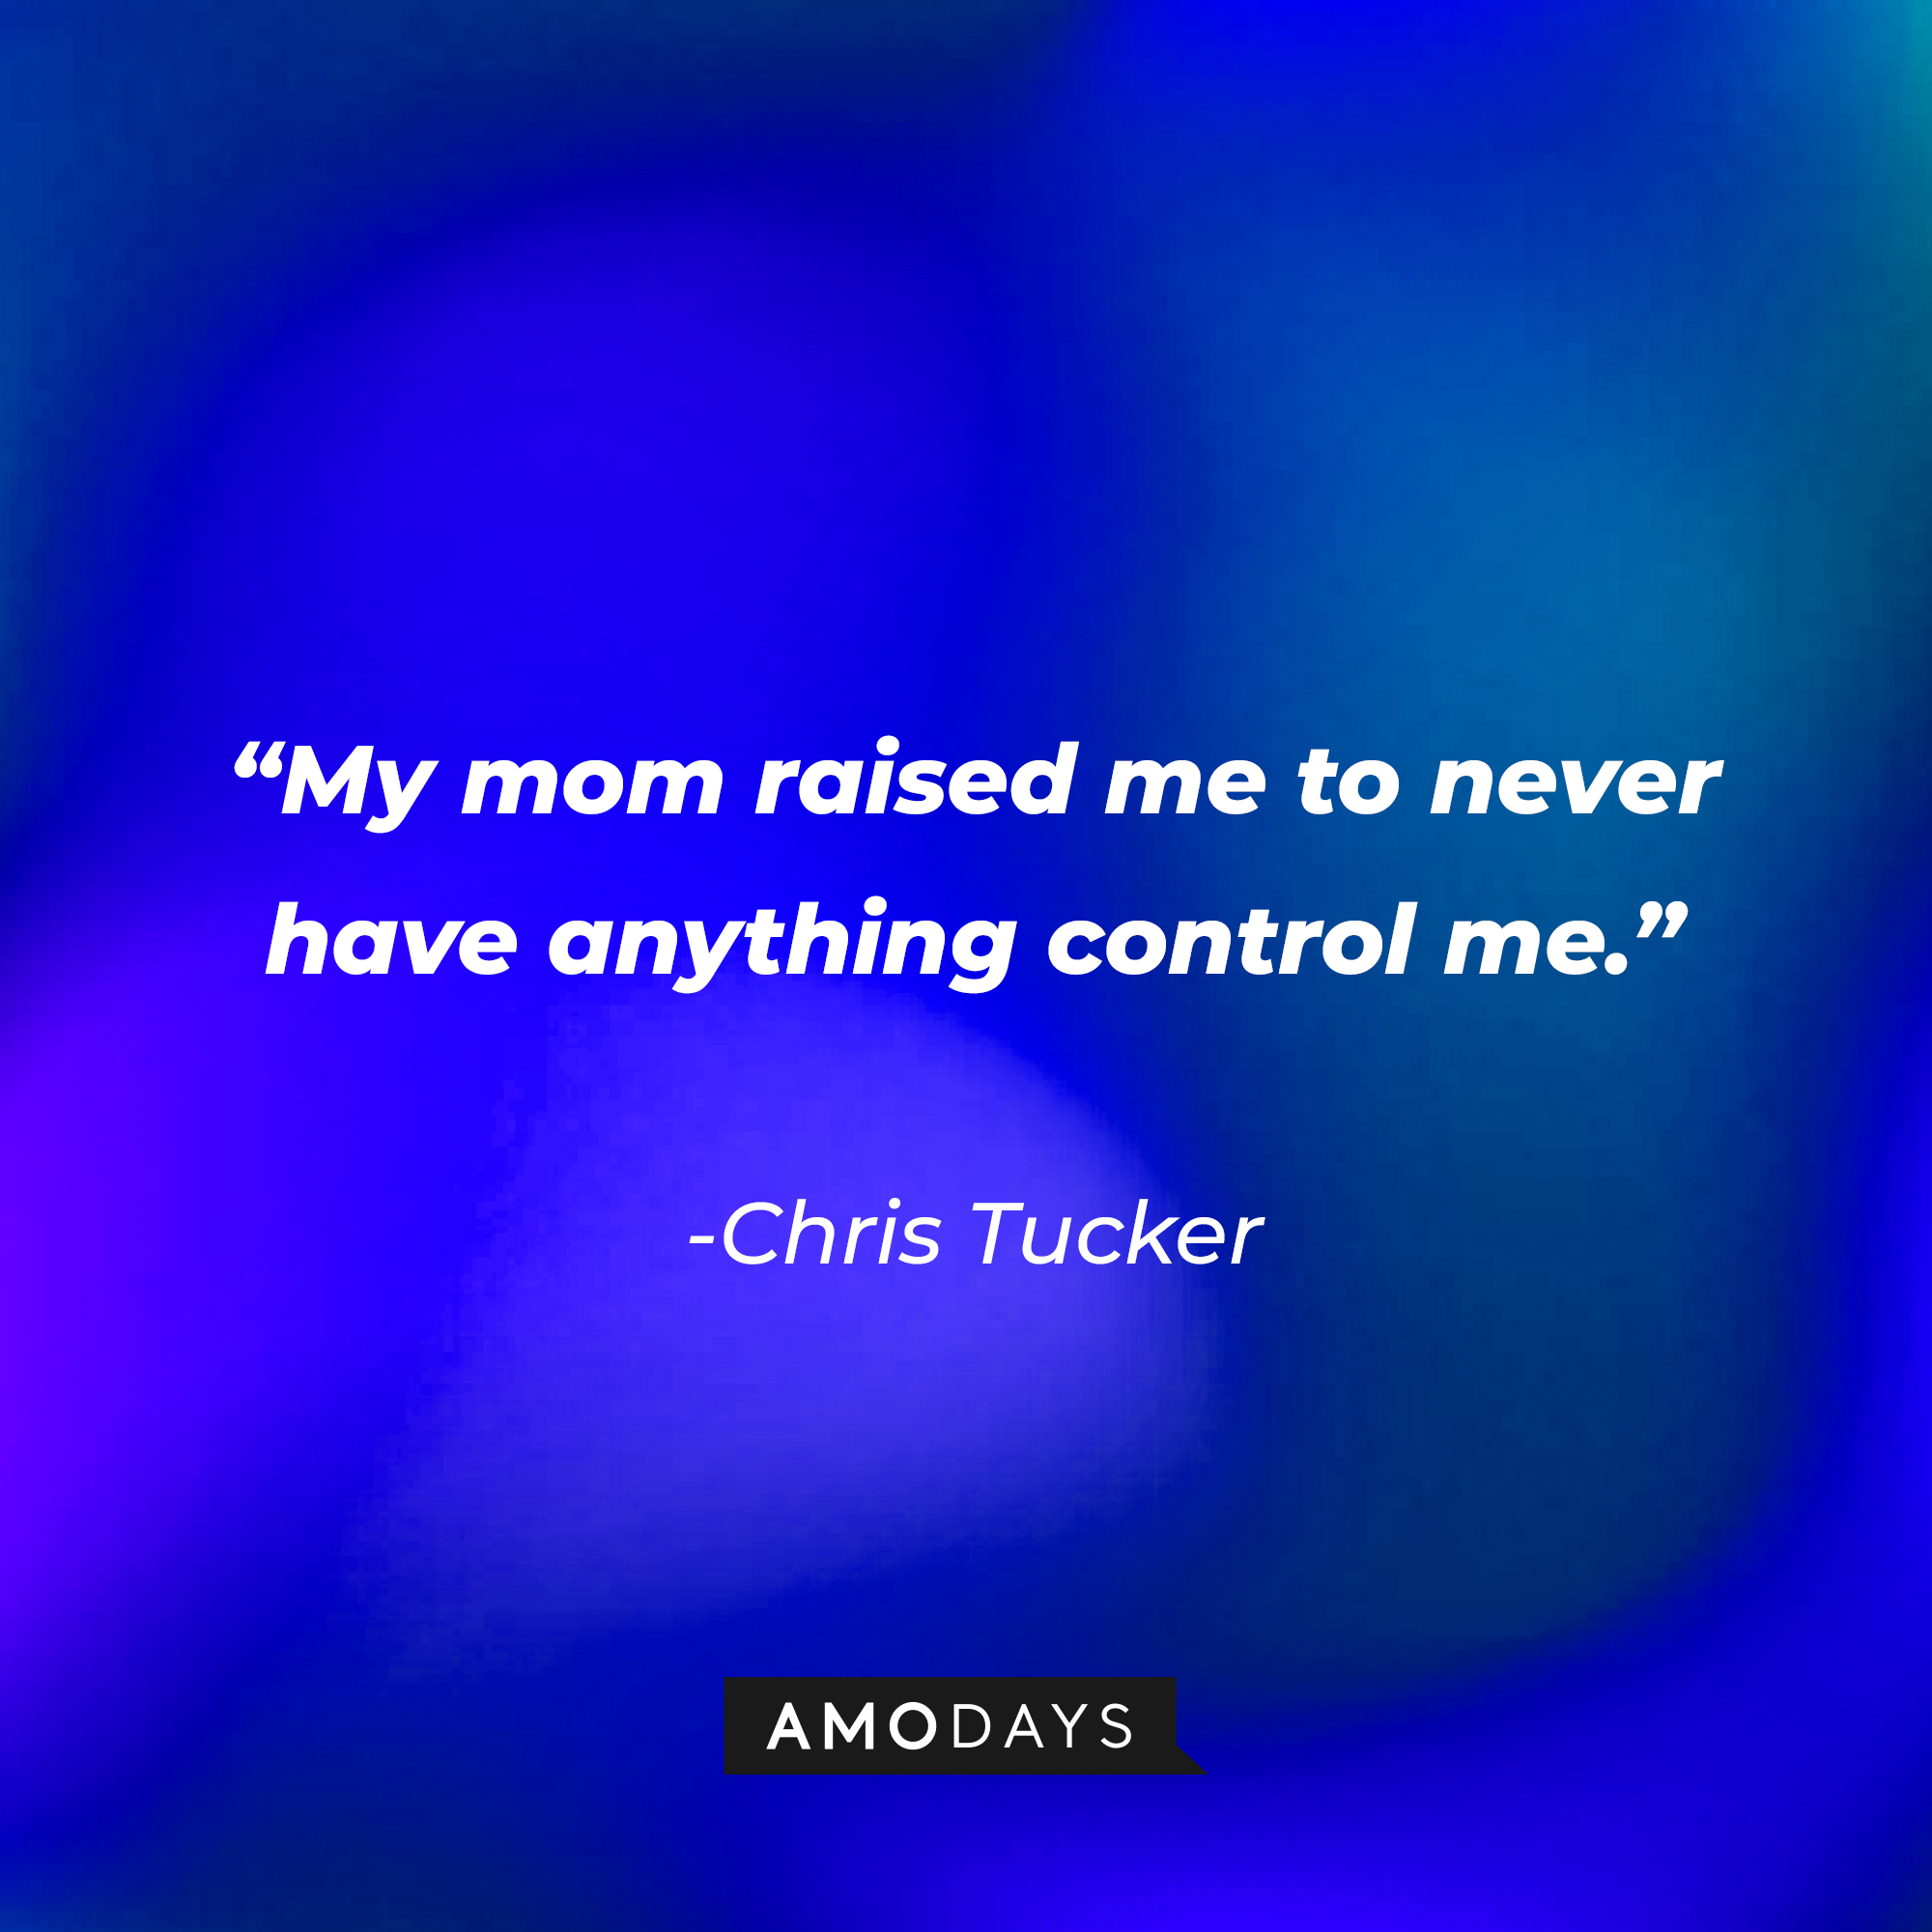 Chris Tucker’s quote: “My mom raised me to never have anything control me.”┃Source: AmoDays